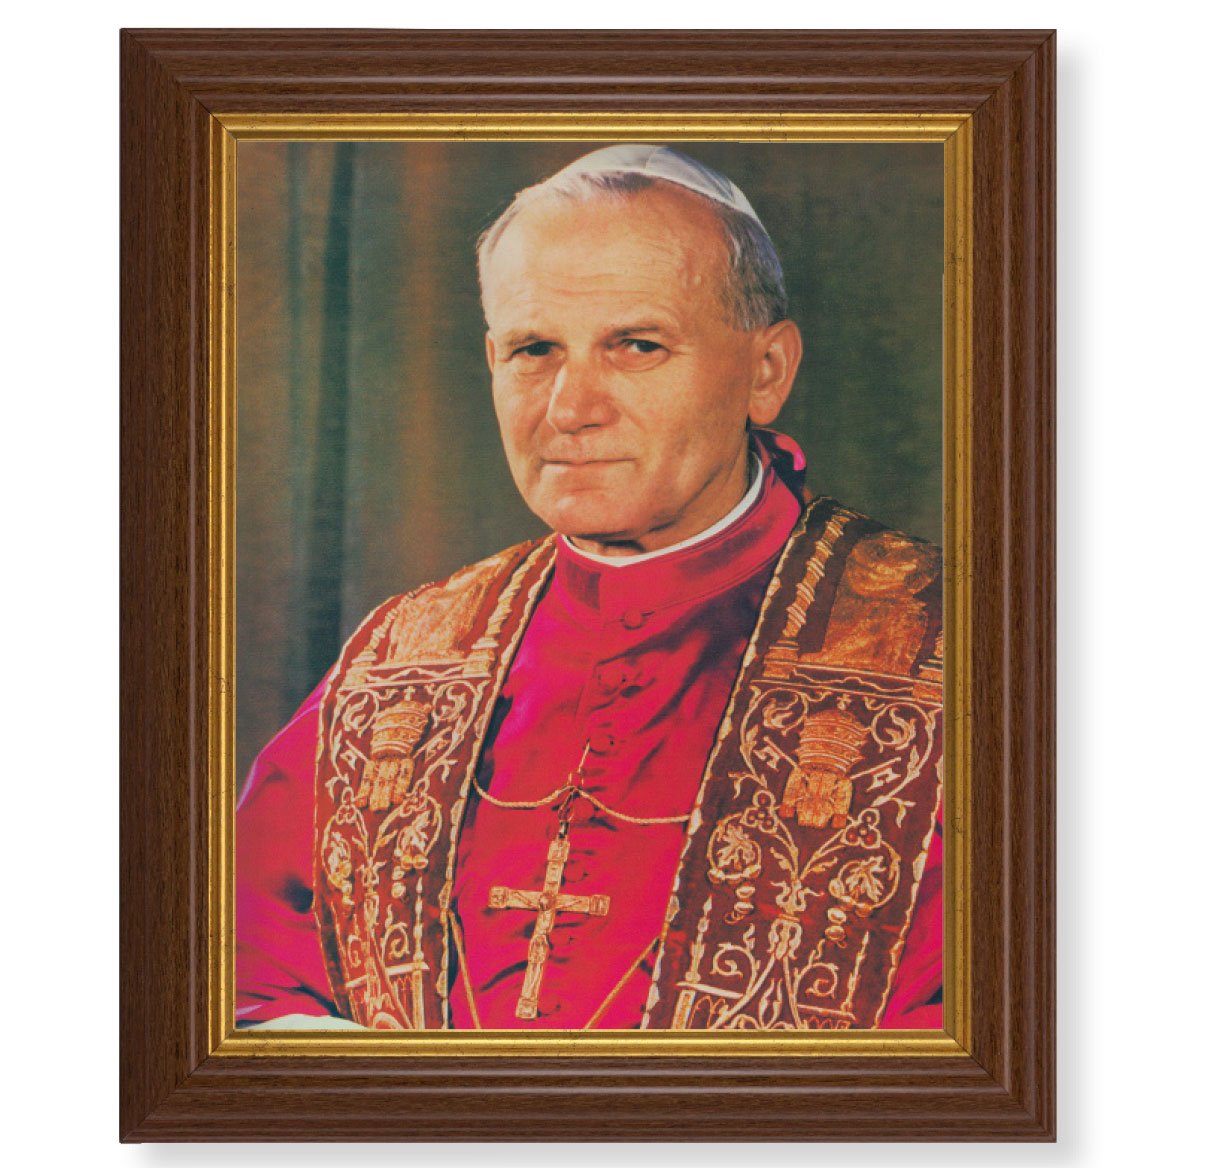 St. Pope John Paul II Picture Framed Wall Art Decor, Large, Traditional Dark Walnut Fluted Frame with Gold Beaded Lip